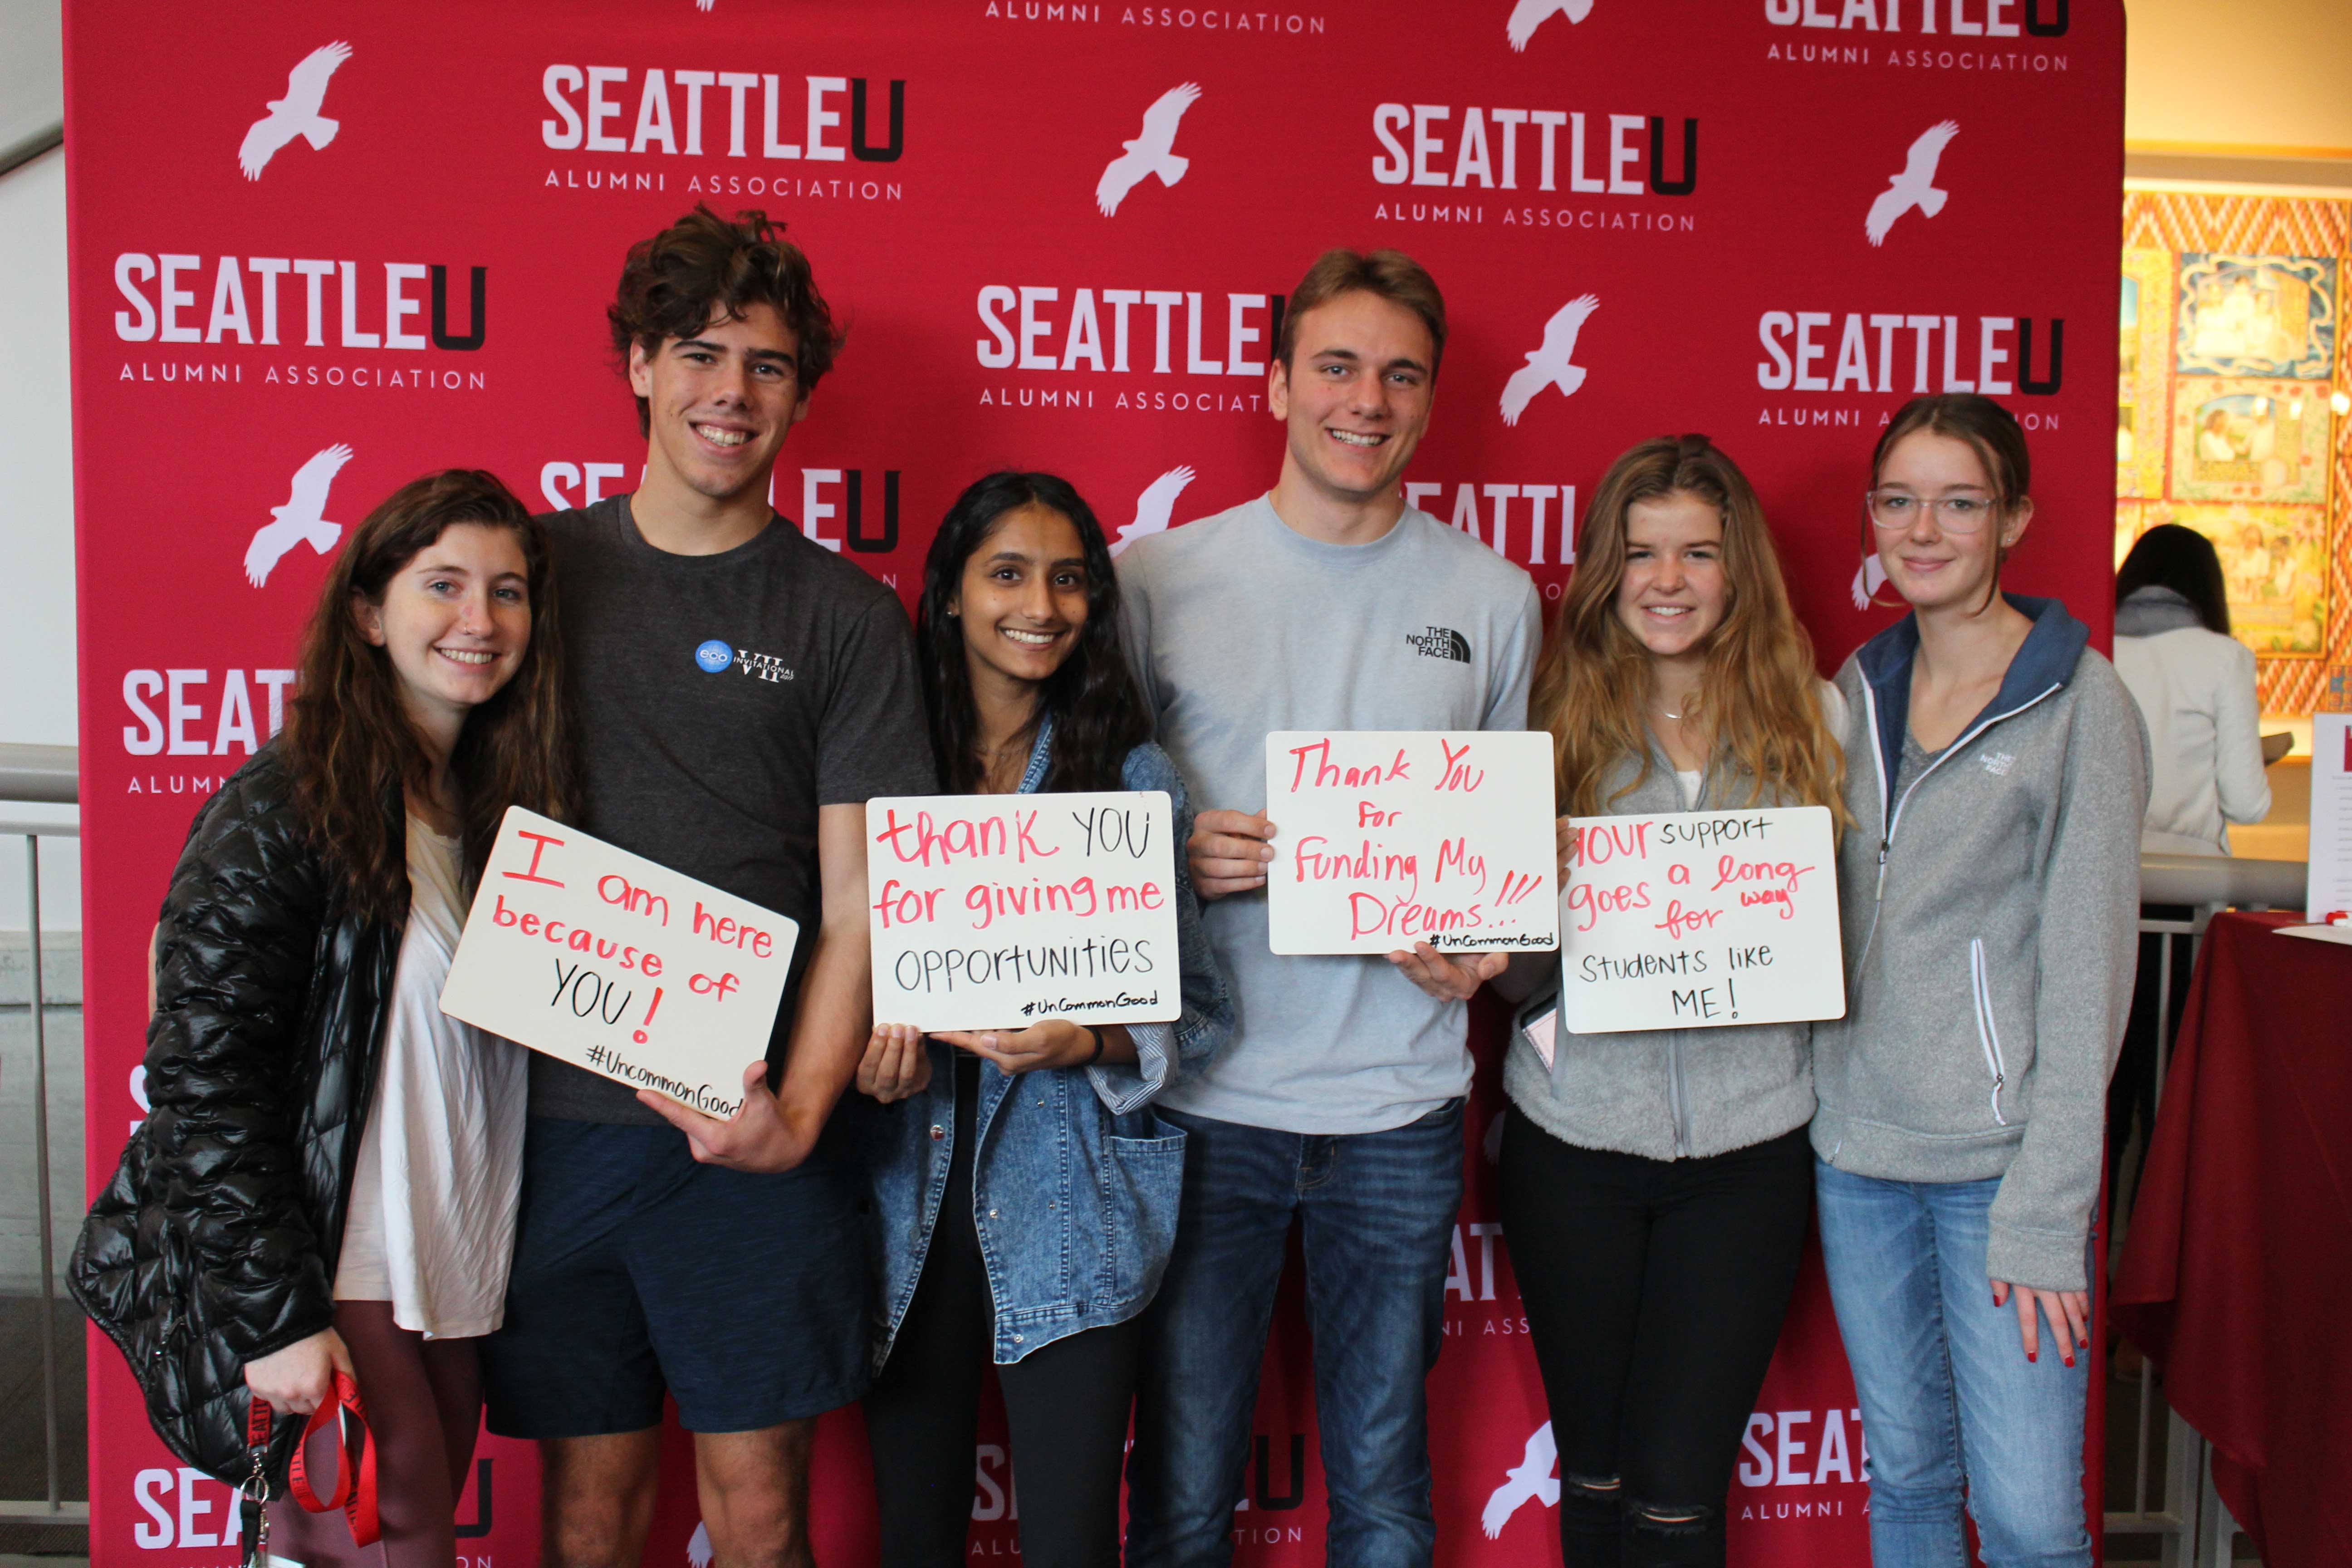 Thankful students holding signs at a photobooth